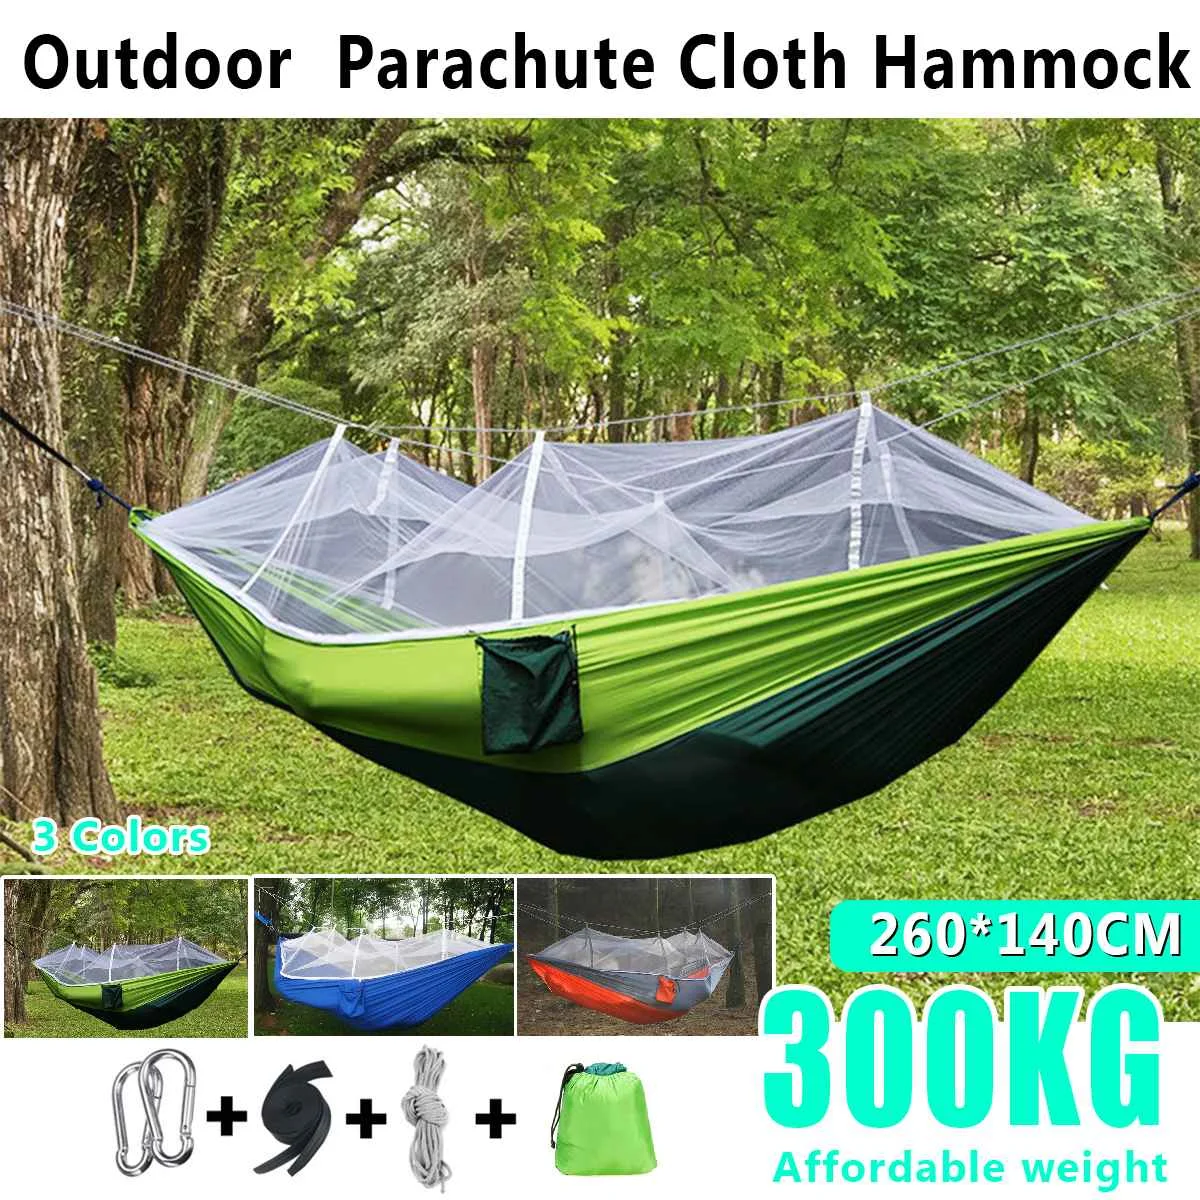 Camping Hammock with Mosquito Net Tent 2 Person Hanging Bed Swing Chair Outdoor 